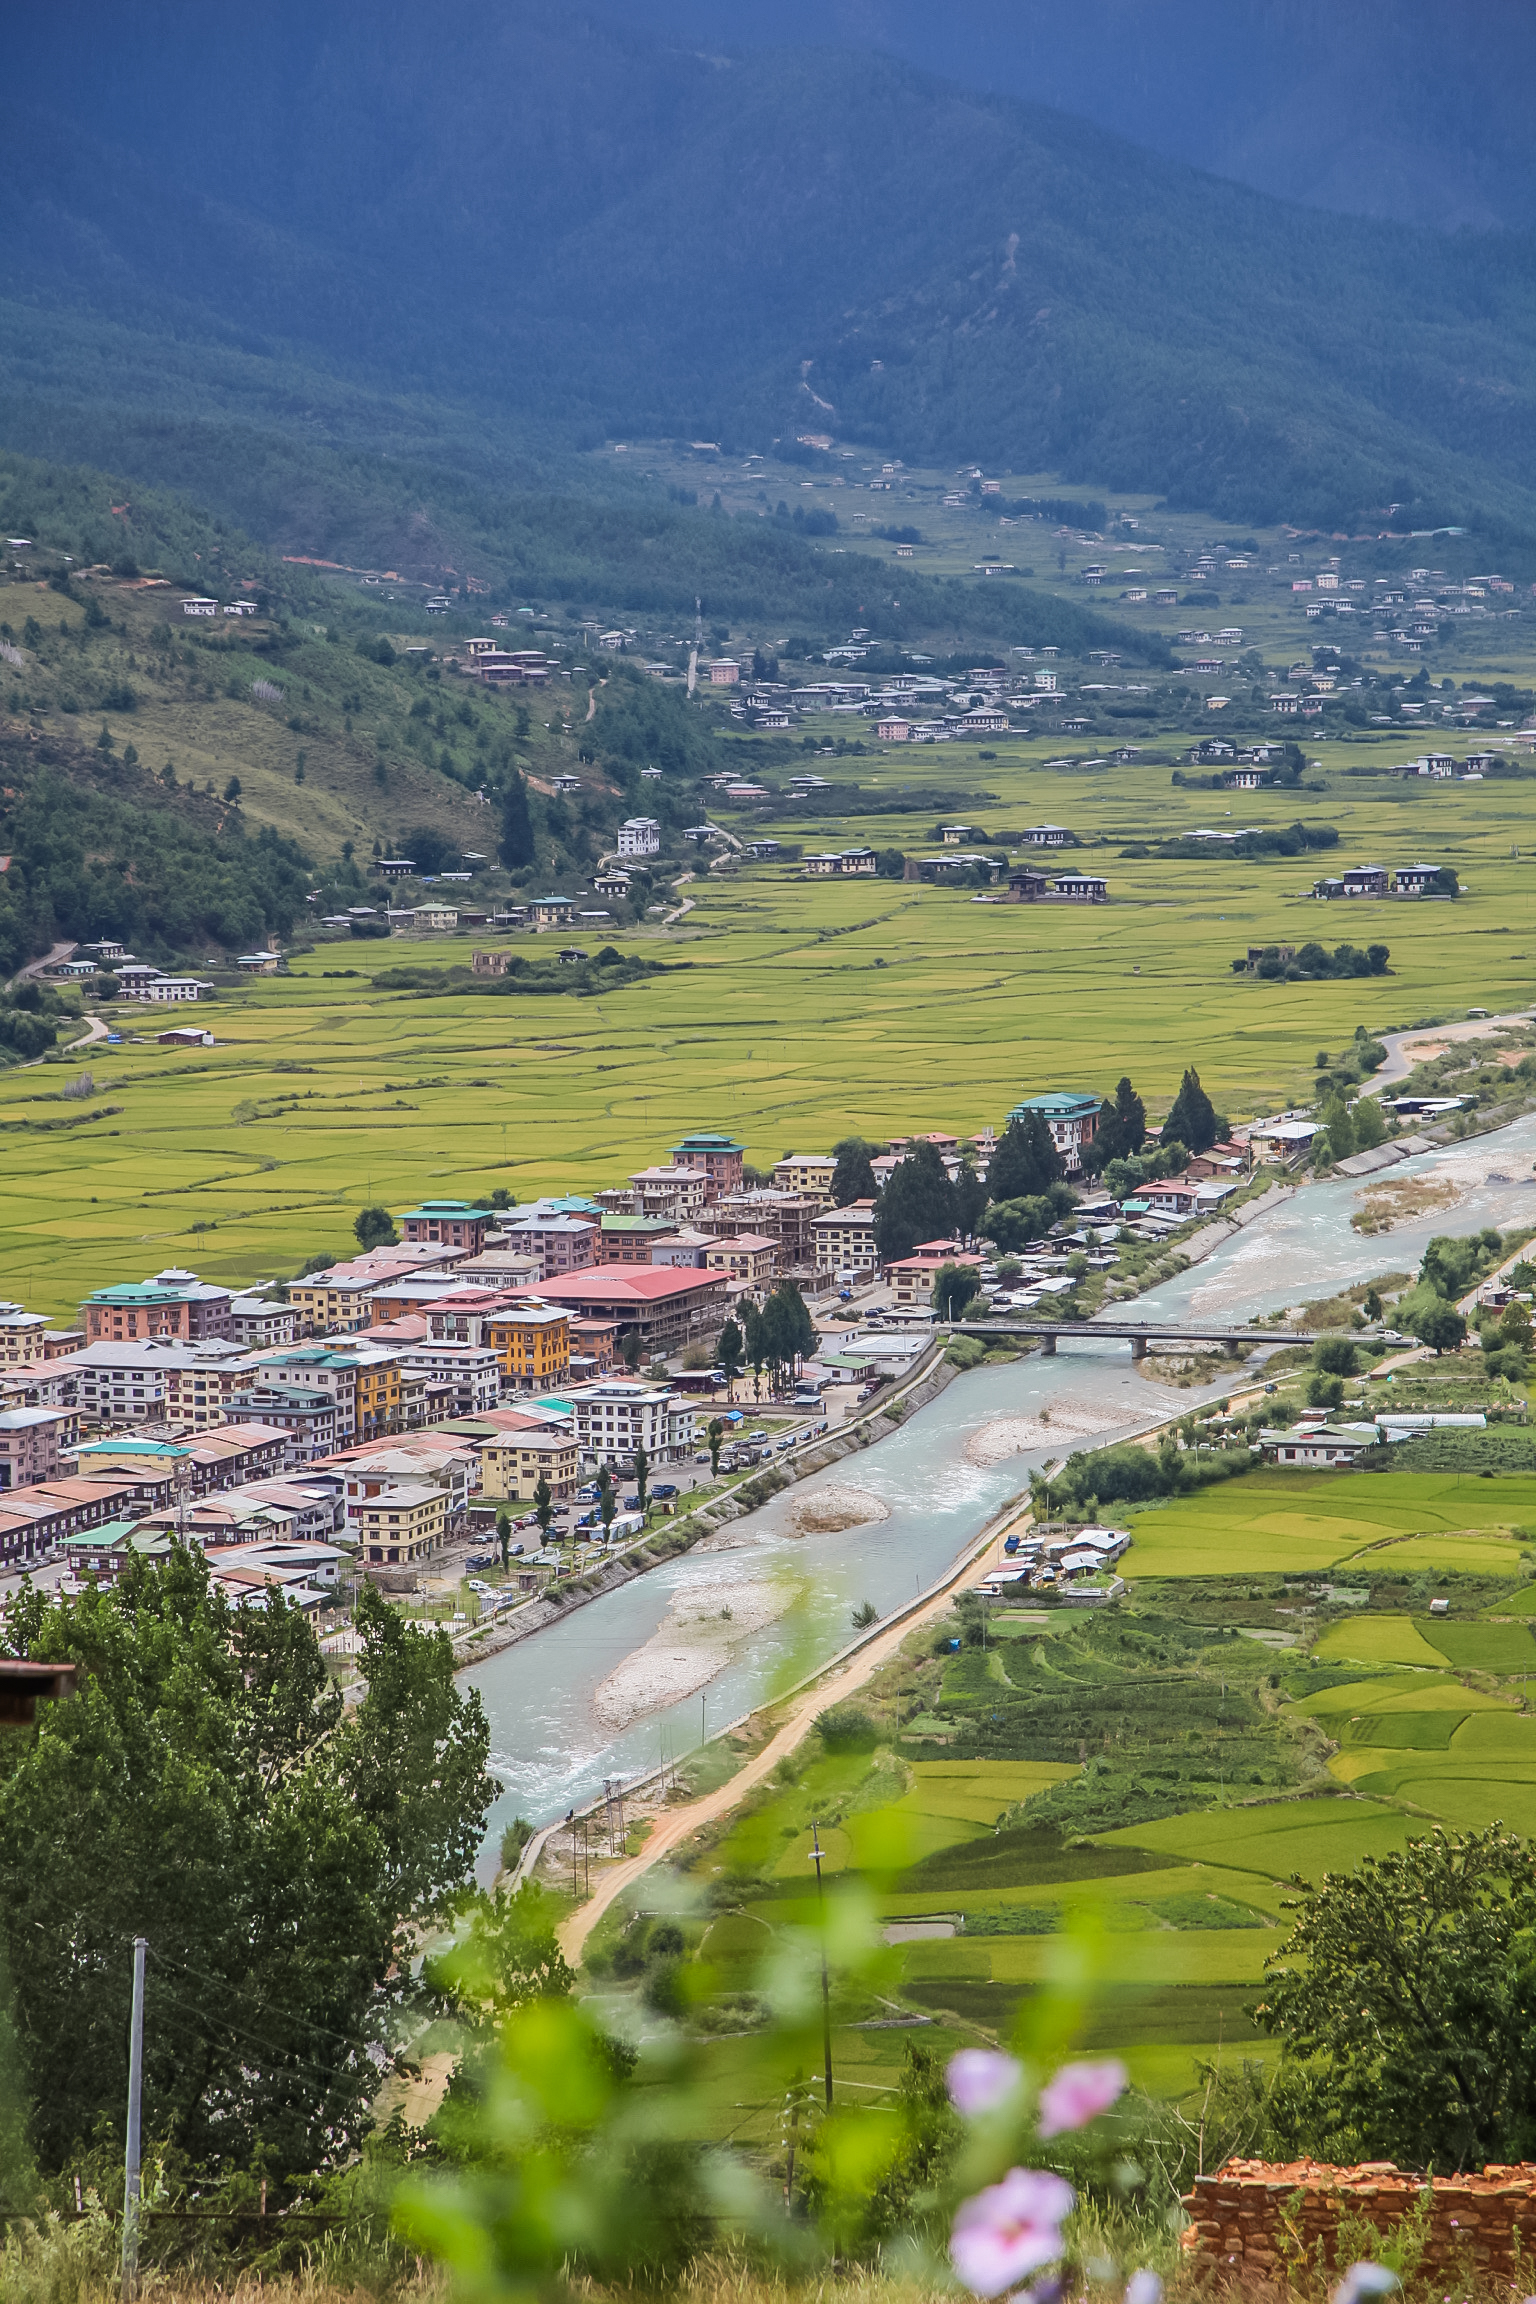  The town of Paro in the valley.    